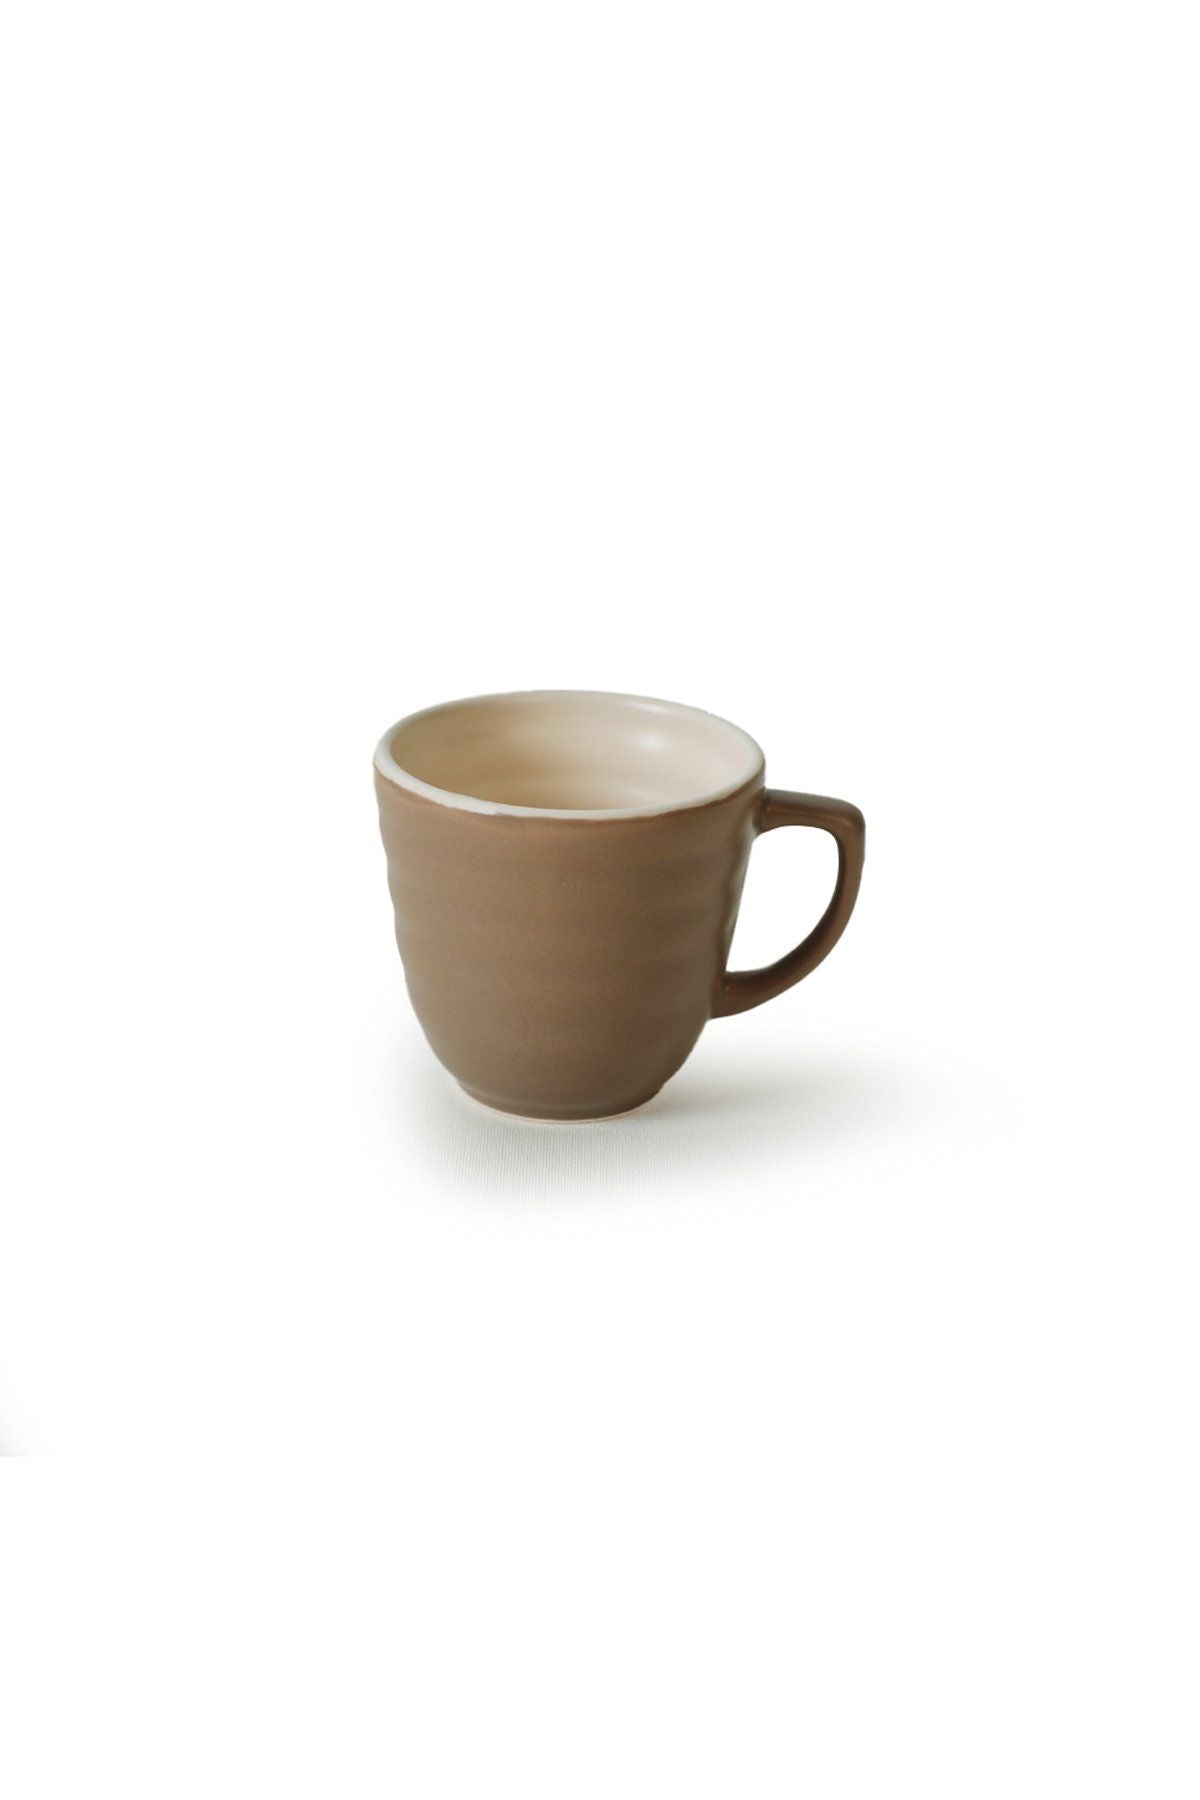 X000155870 - Coffee Cup Set (12 Pieces)